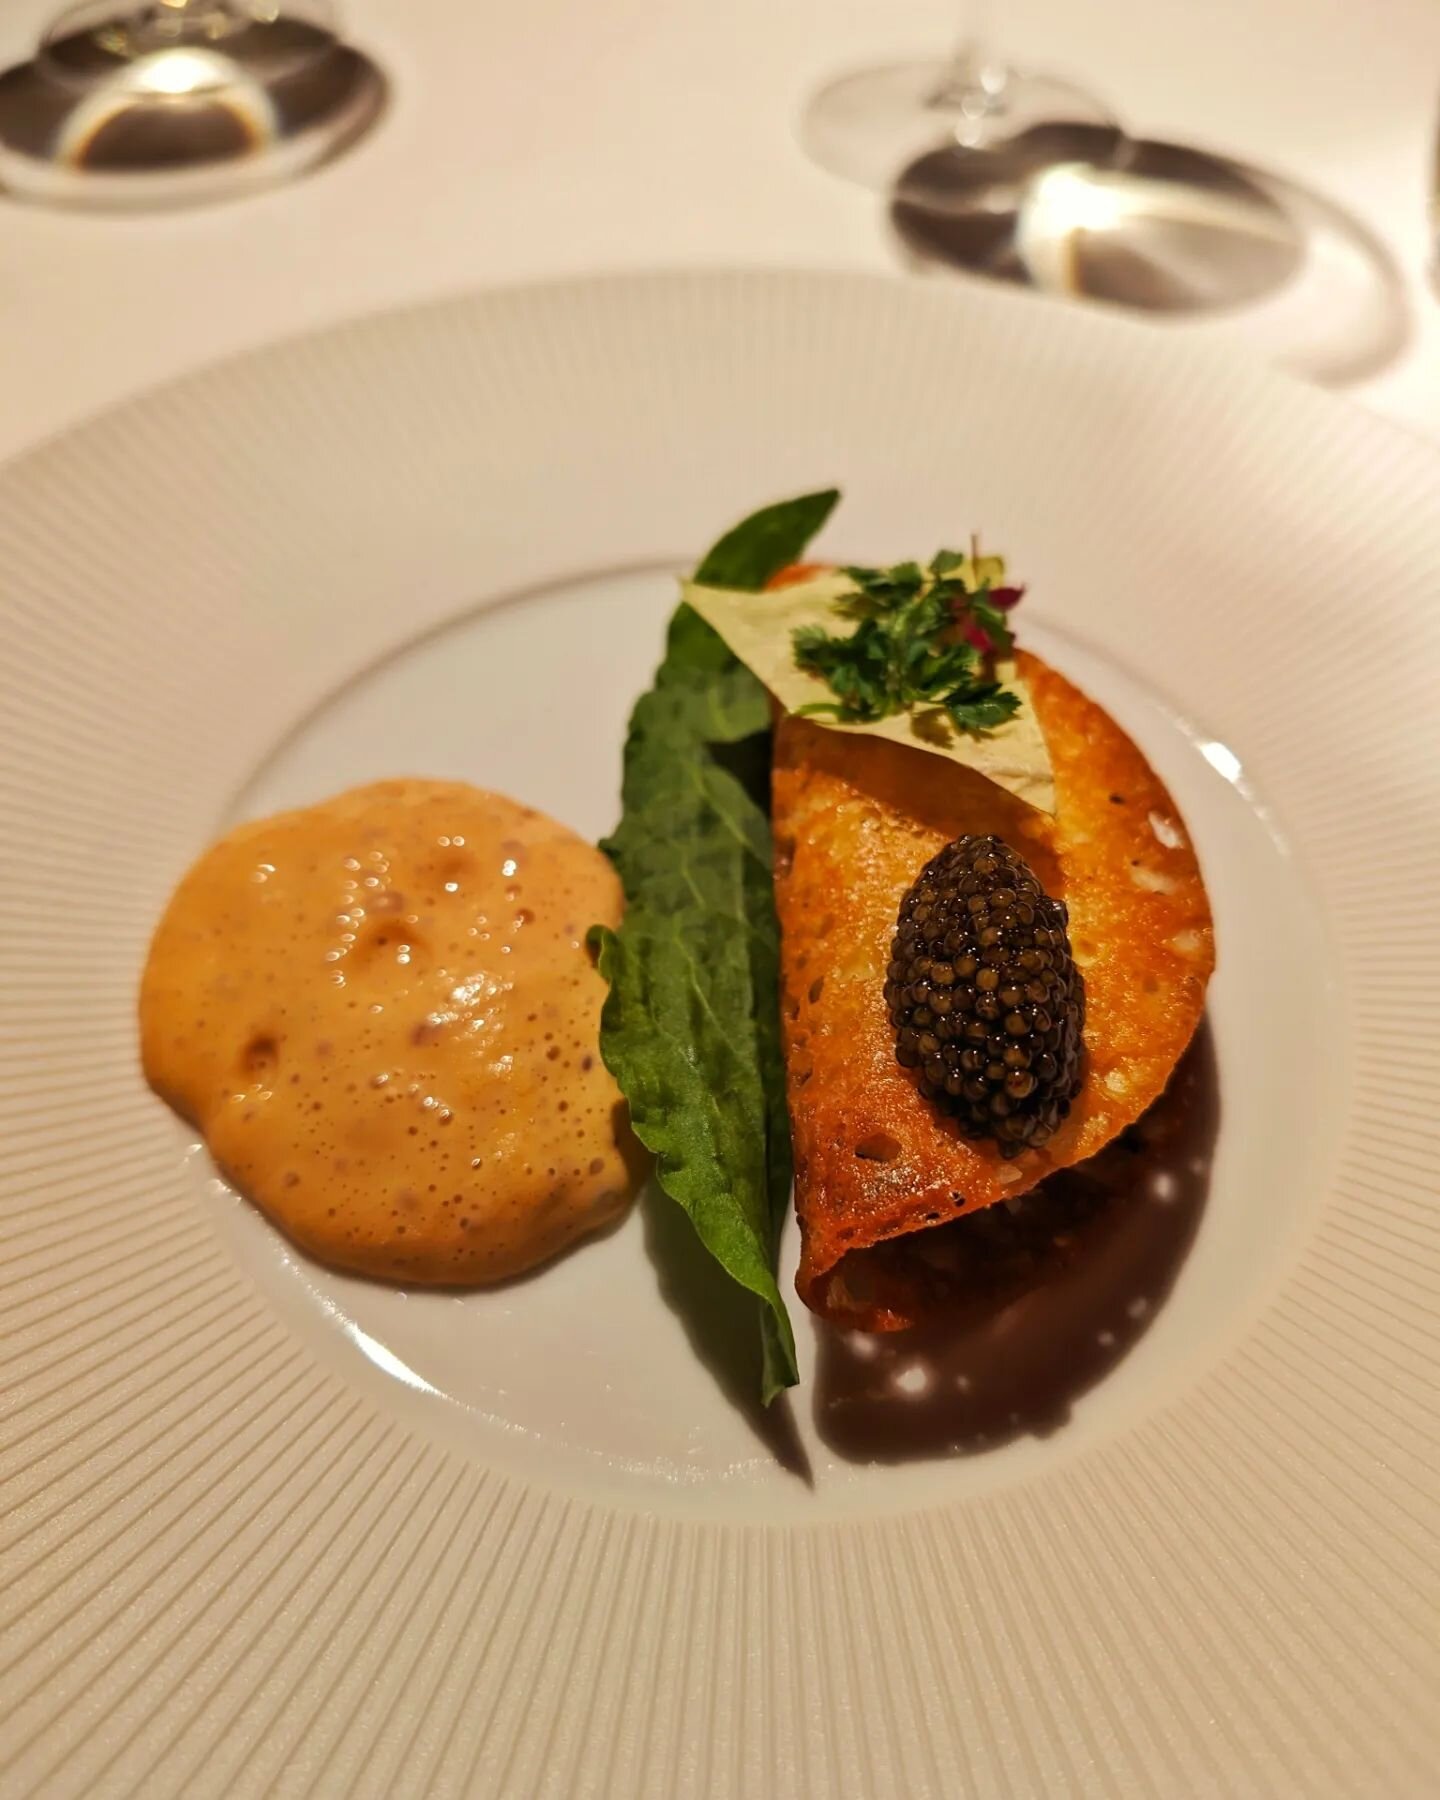 The very best comes at the end.

Galettes, spider crab, citrus, Ossetra caviar.

The first time I saw this course was at @annette.sandner when she was at Tantris, and it immediately triggered something. Because, visually, this course, even without kn